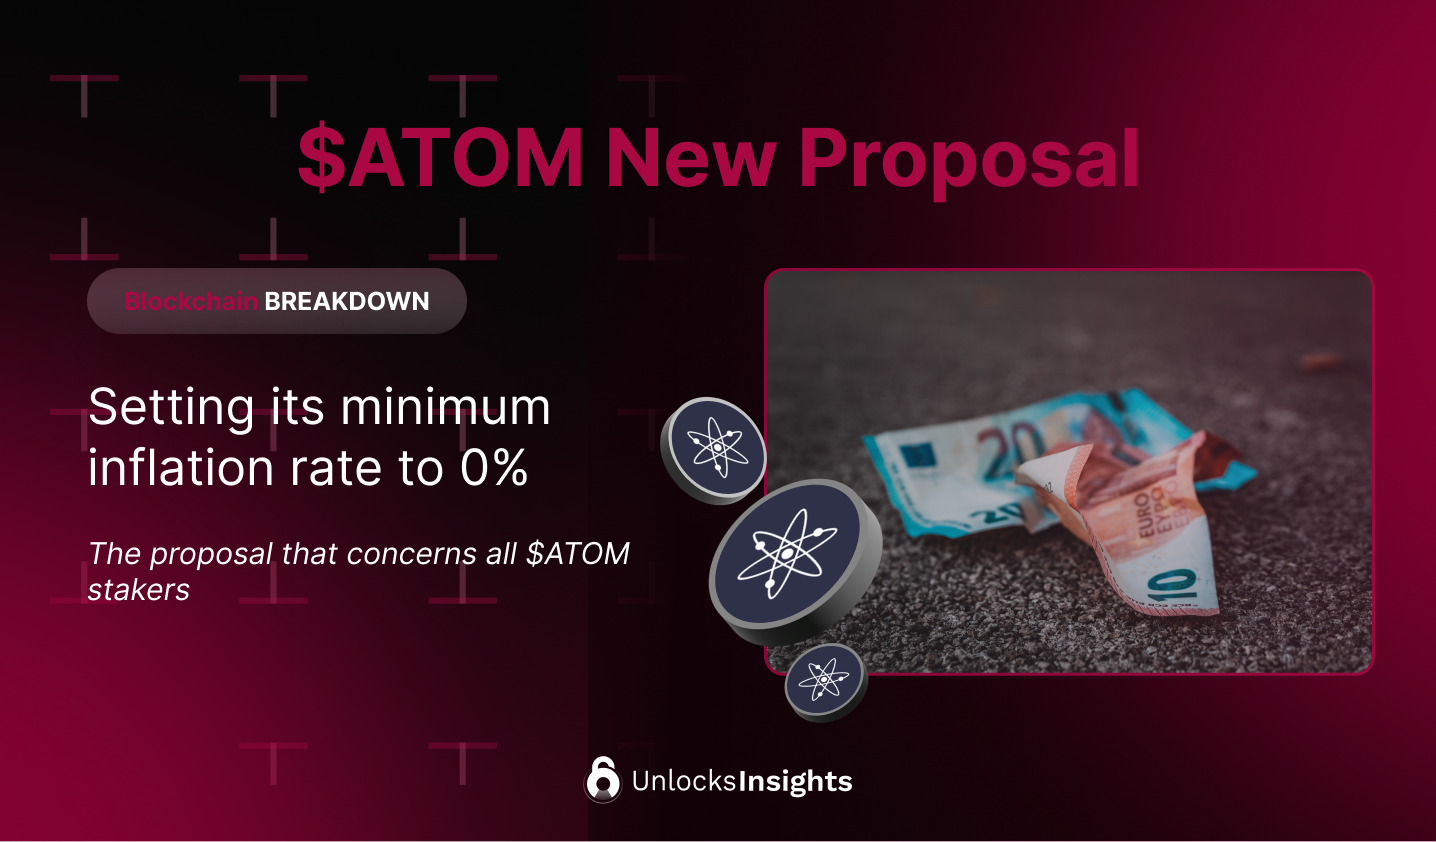 New proposal for $ATOM to set the minimum inflation rate to 0%